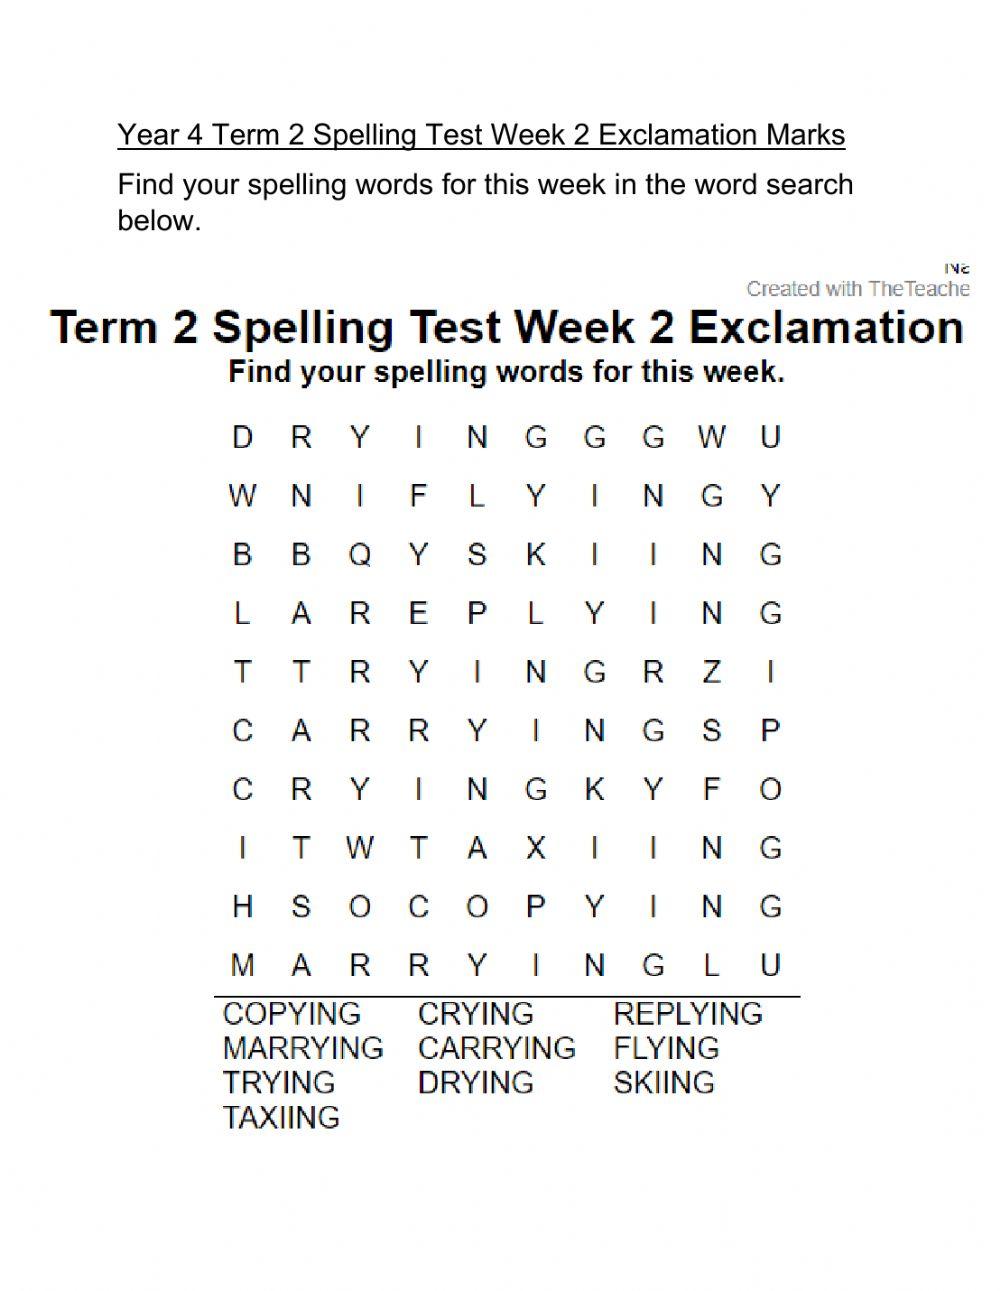 DIS Term 2 Spelling Week 2 Exclamation Marks